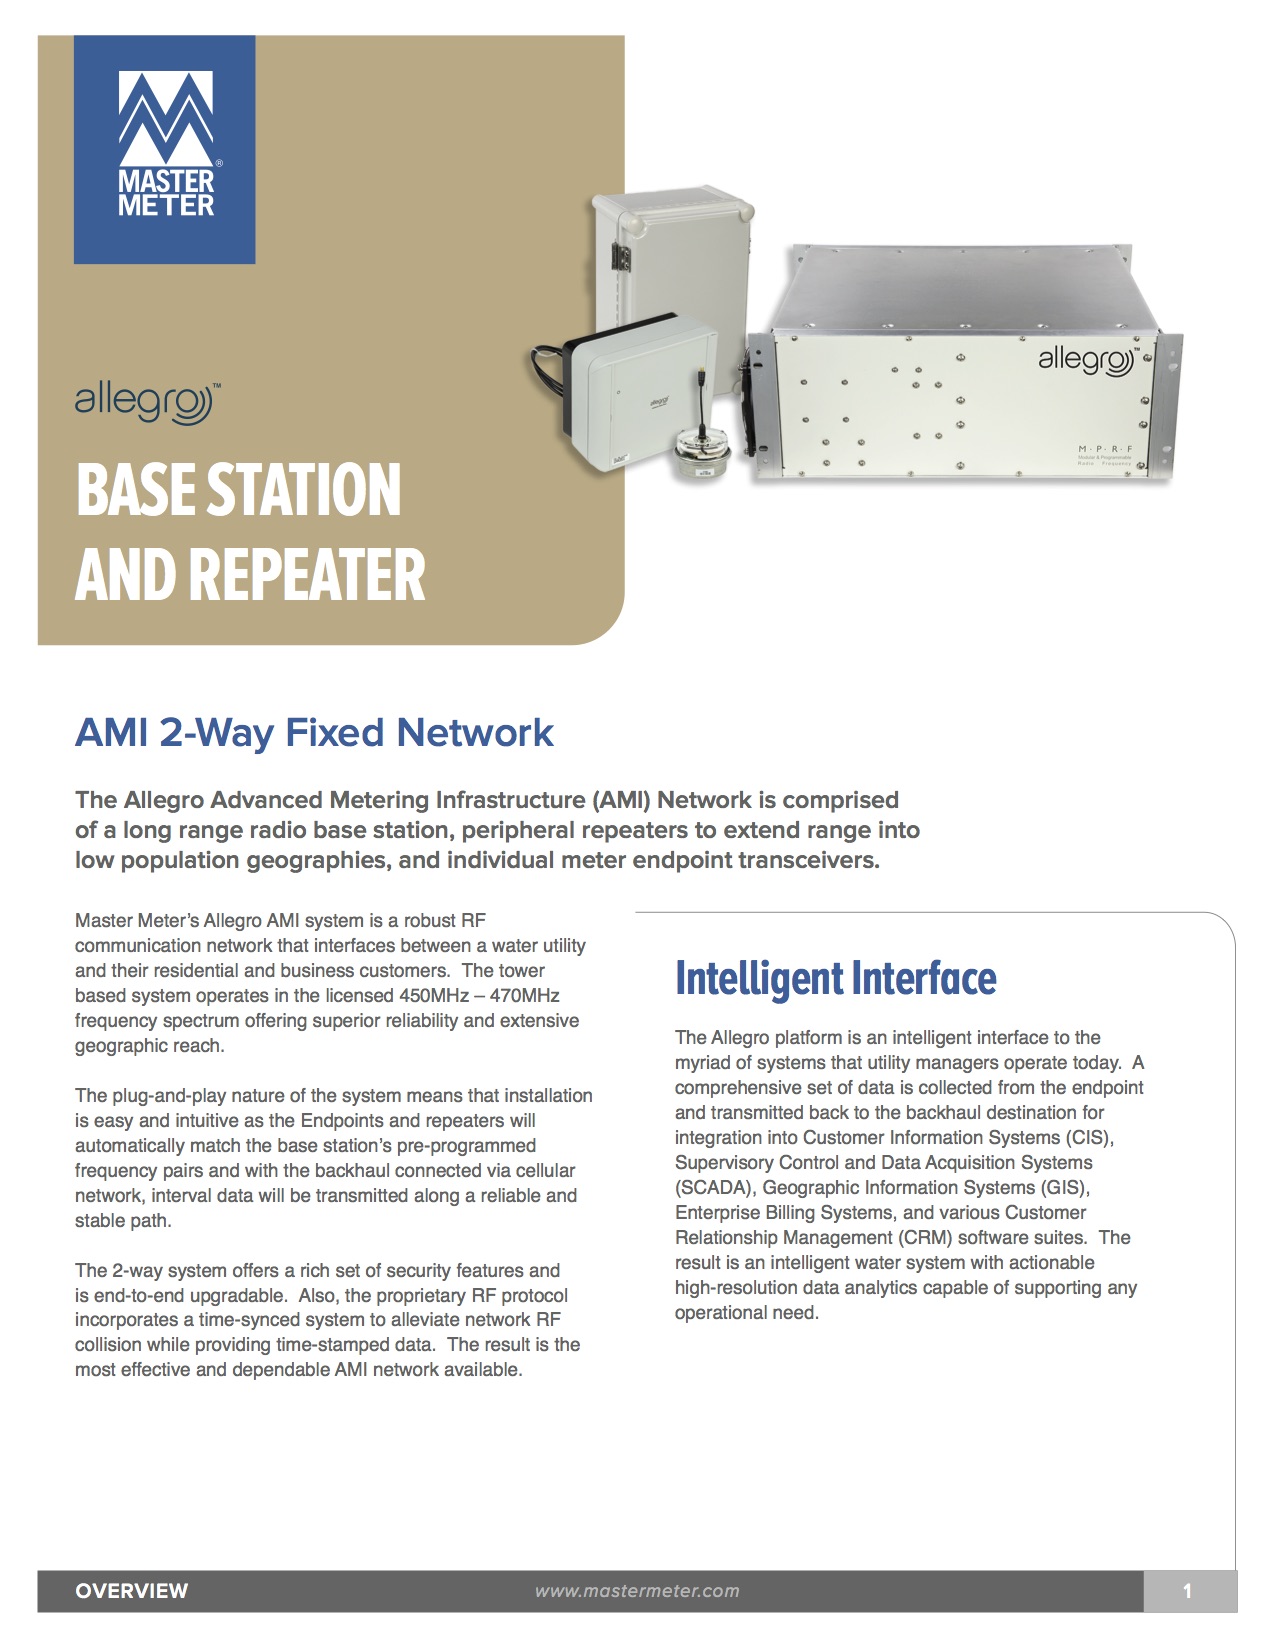 Allegro Base Station and Repeaters